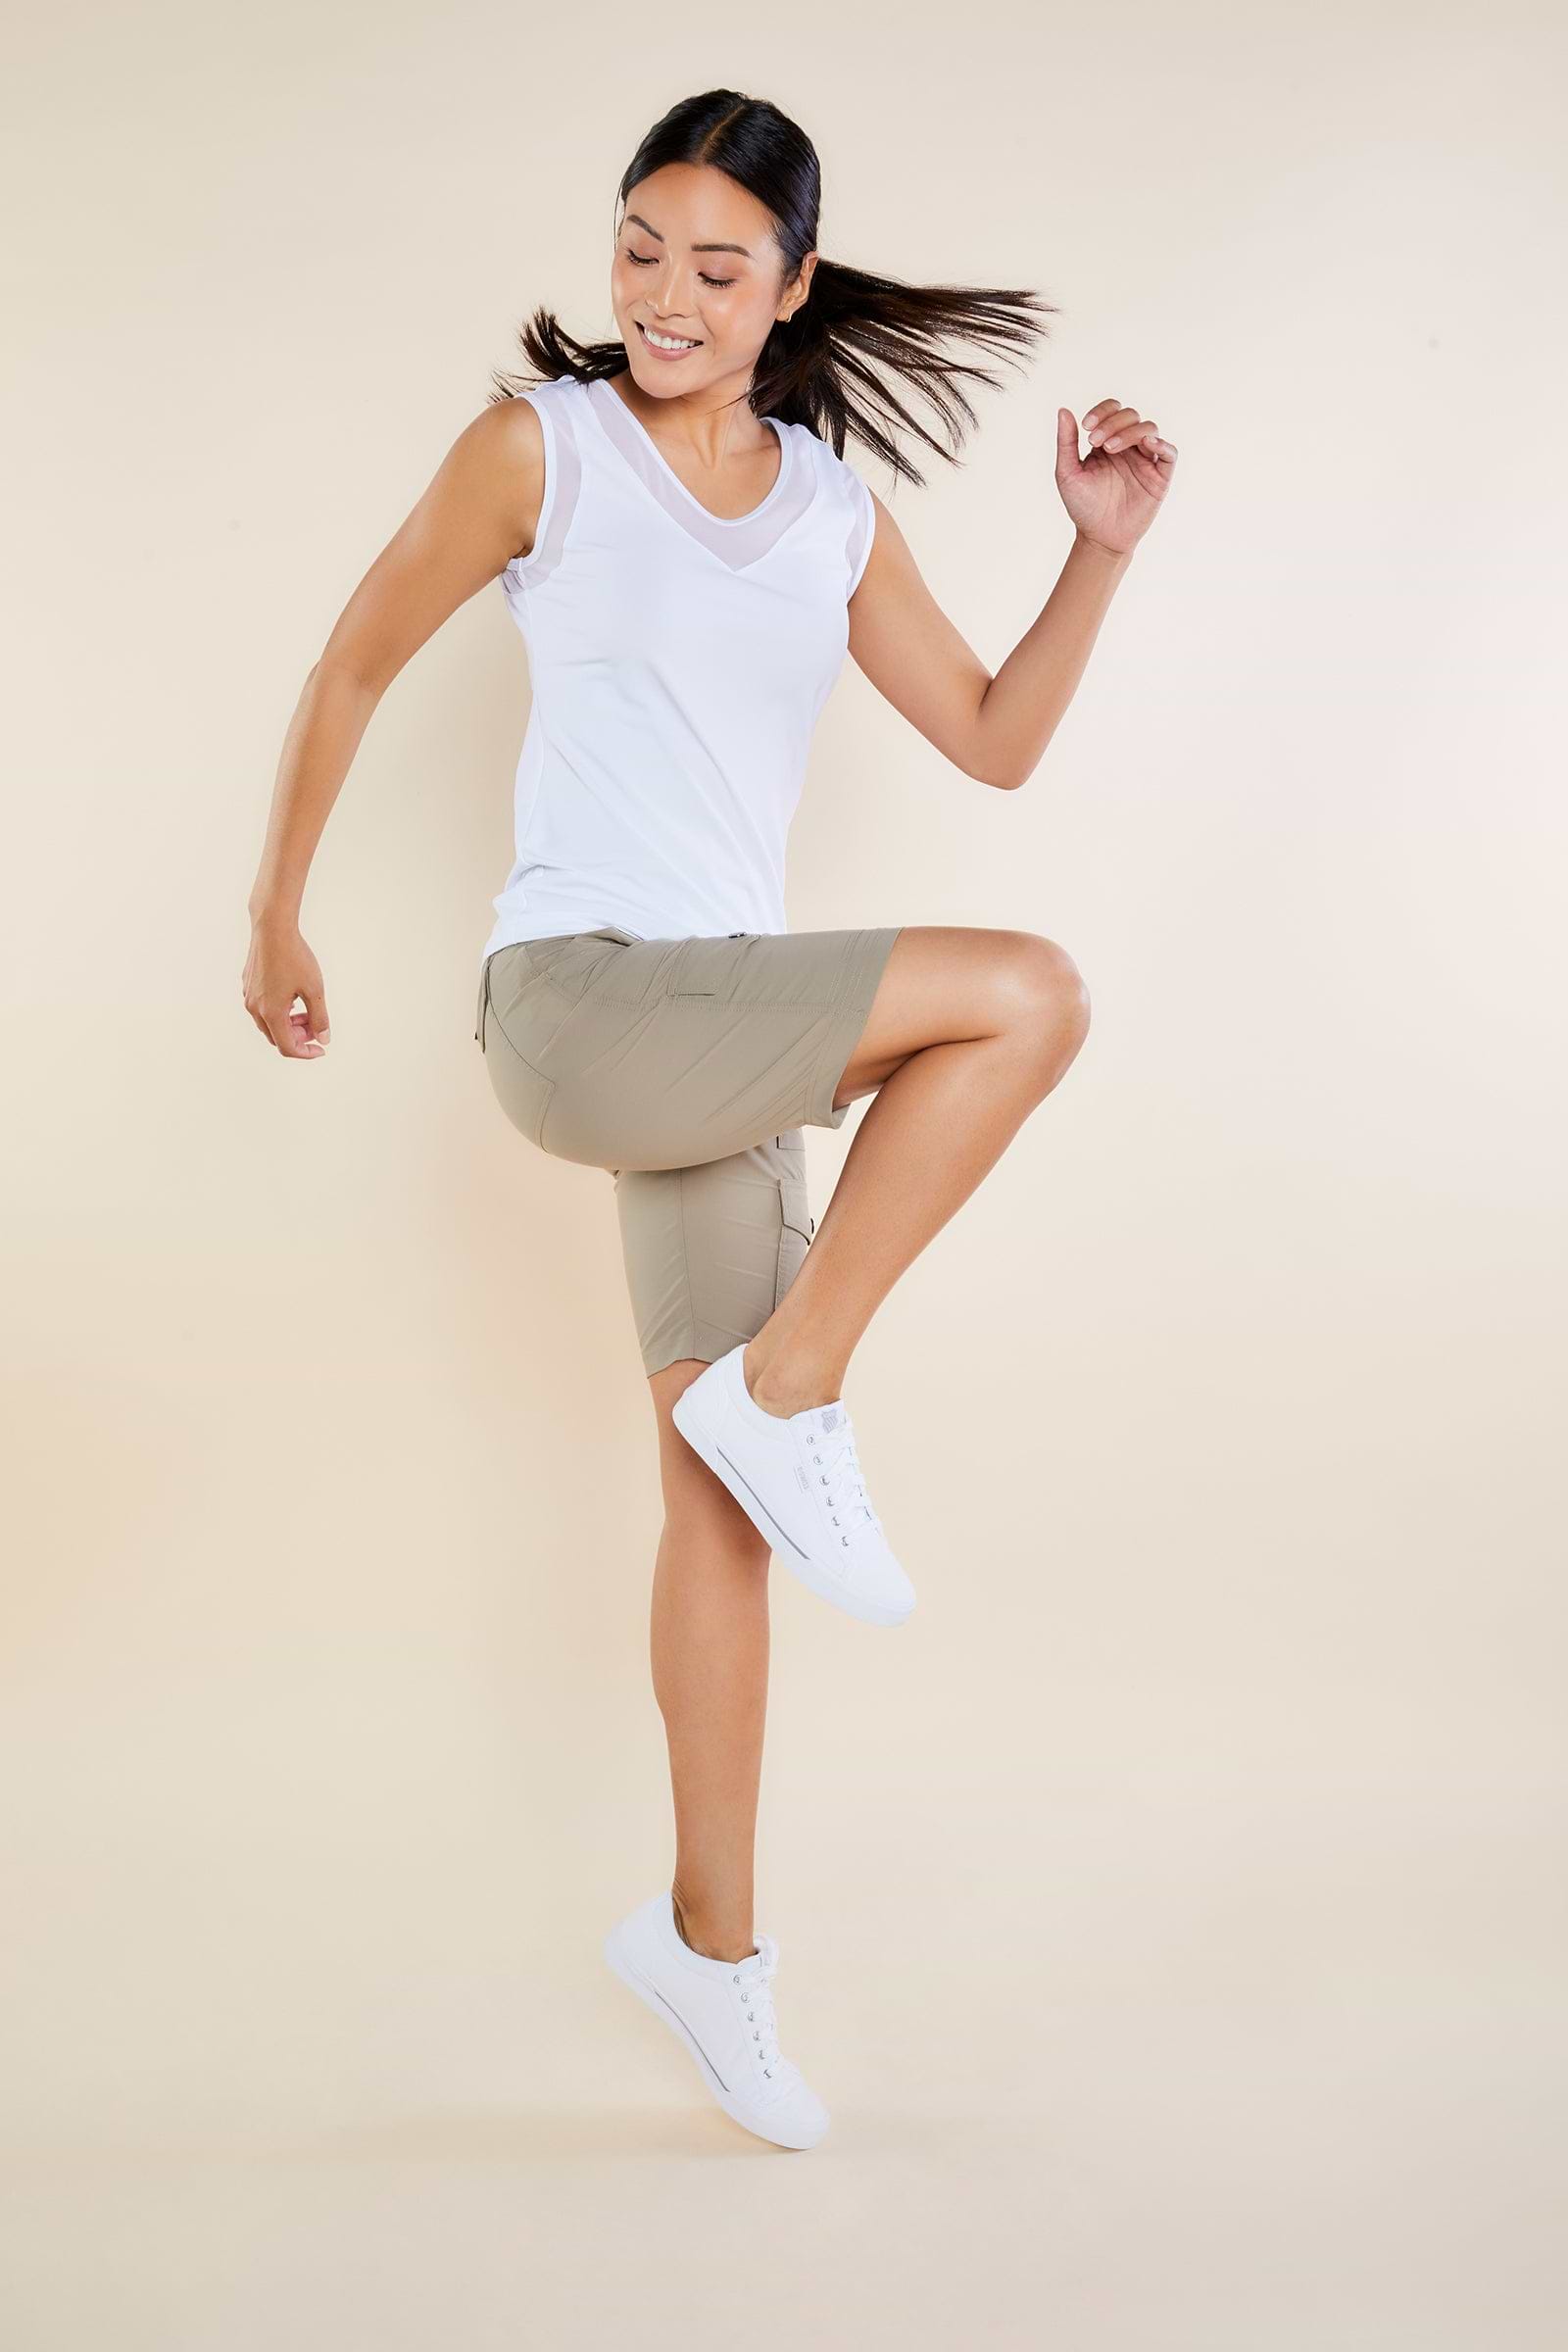 The Best Travel Shorts. Woman Showing the Side Profile of an Apiedi Shorts in Khaki.